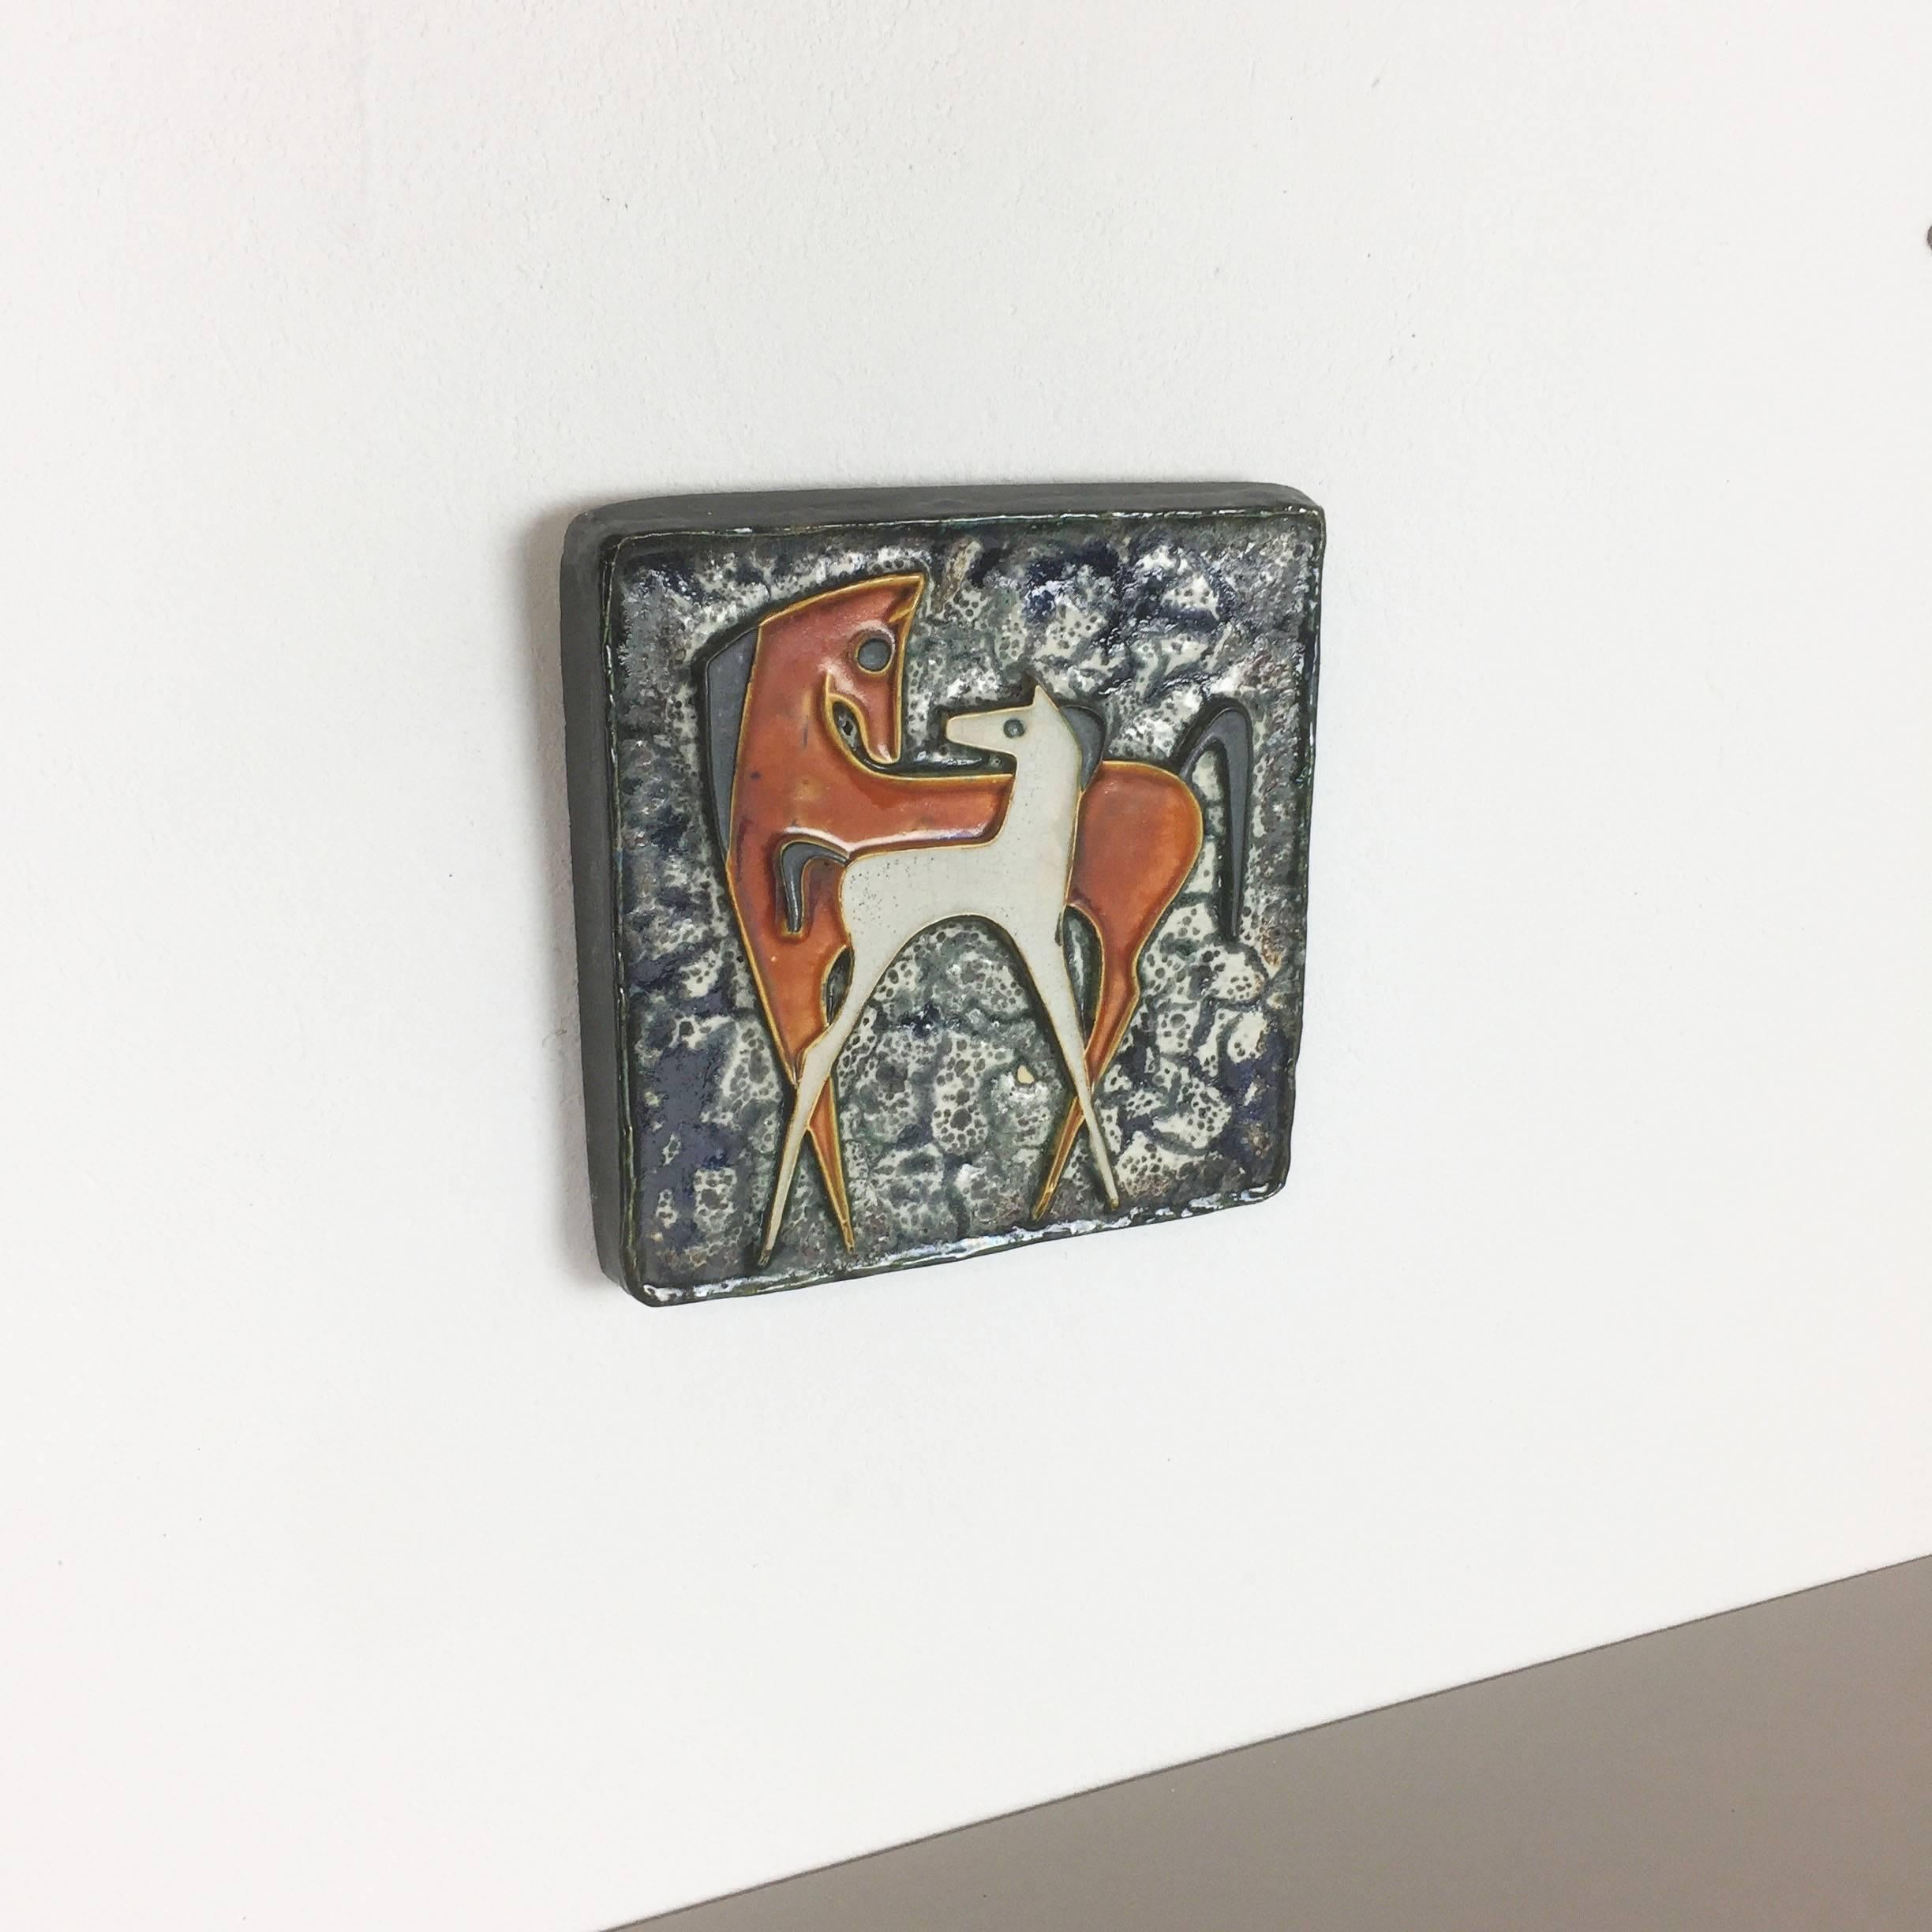 Article:

Ceramic wall plate


Decade:

1960s


Producer:

Atelier Schäffenacker, Ulm Germany


Design: 

Helmut Schäffenacker


This original vintage ceramic wall plate with abstract hand-painted and colorful illustrations of